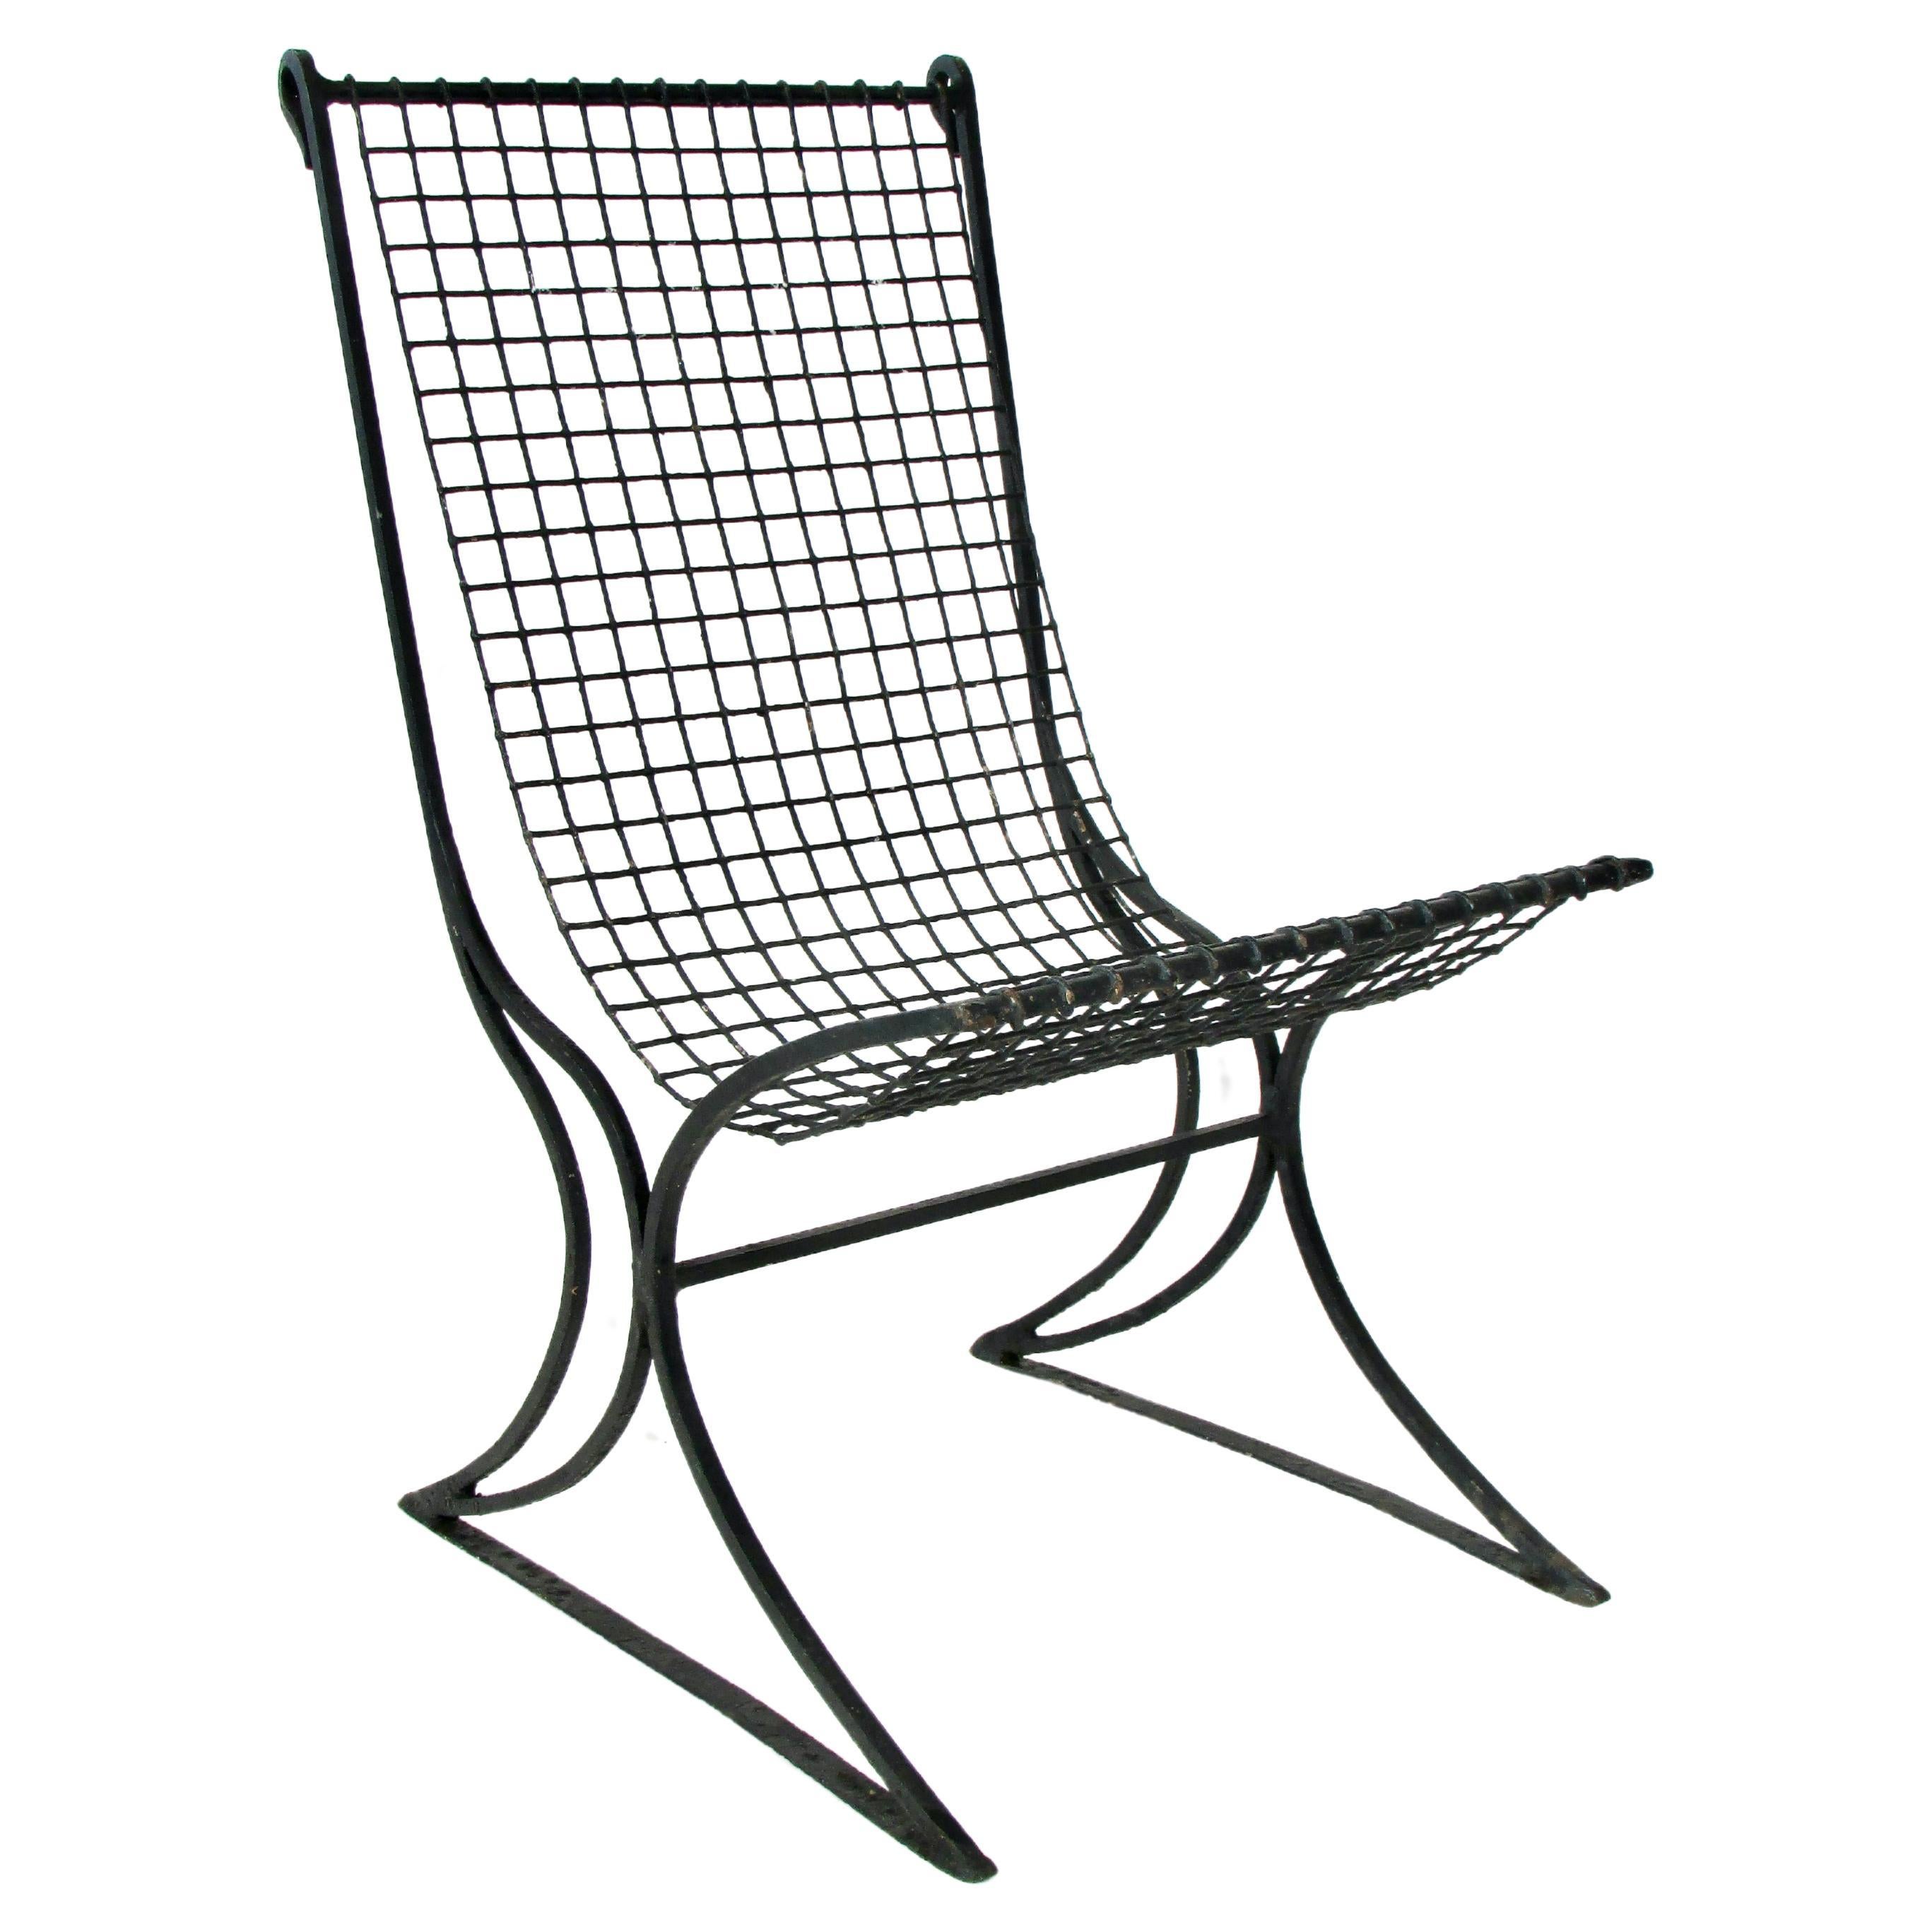 Early 20th century wrought iron with wire seat garden chair in old black paint